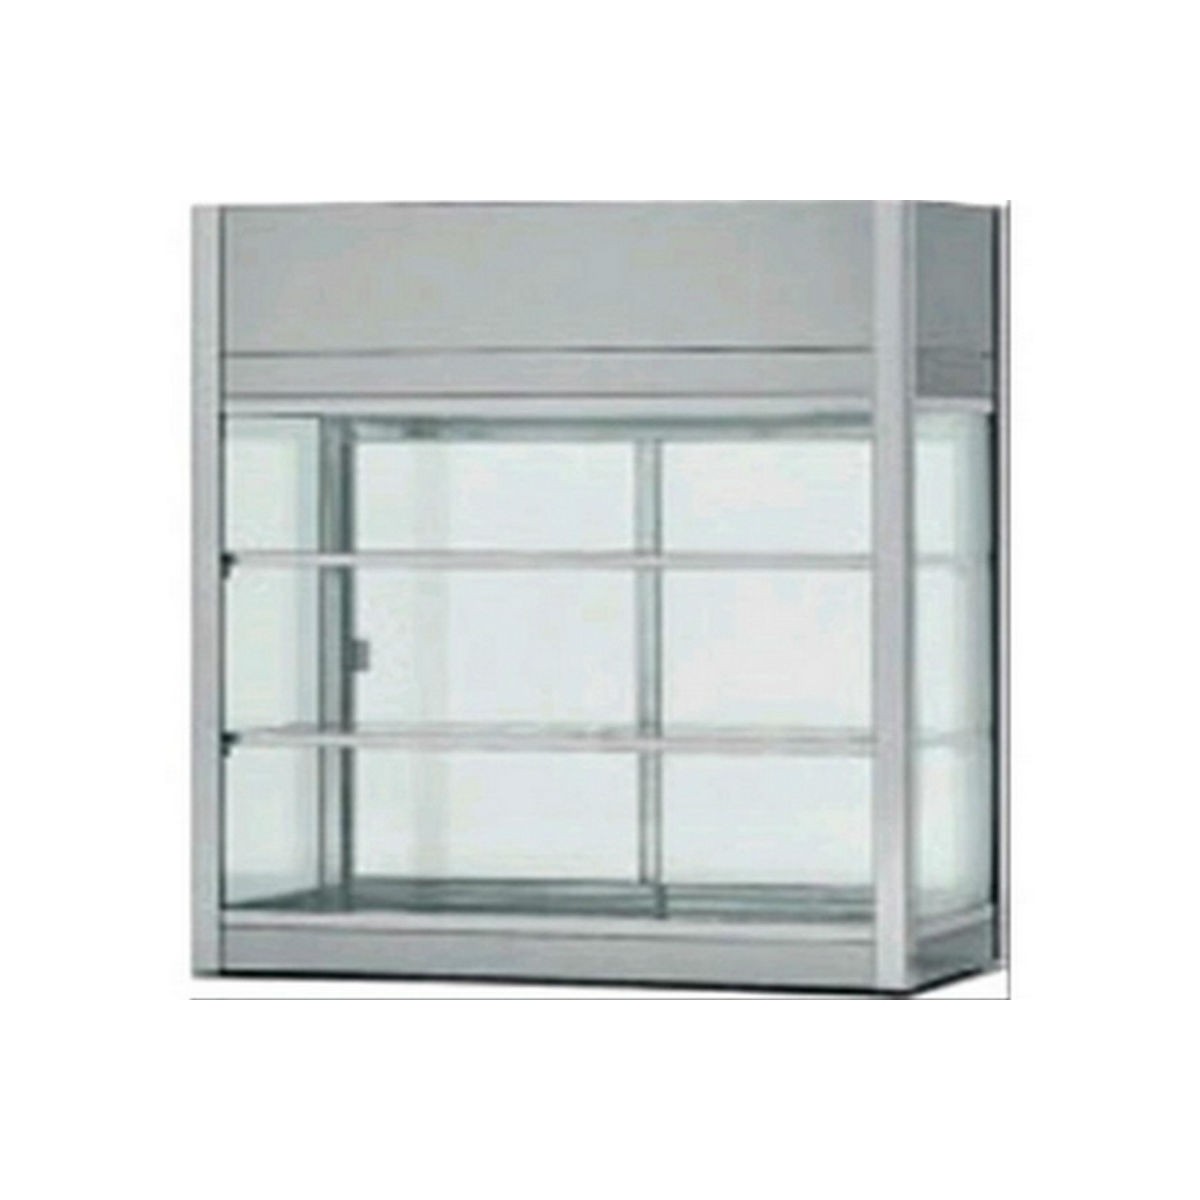 Afp Vfi4720 Refrigerated Countertop Display Cabinet In 18 10